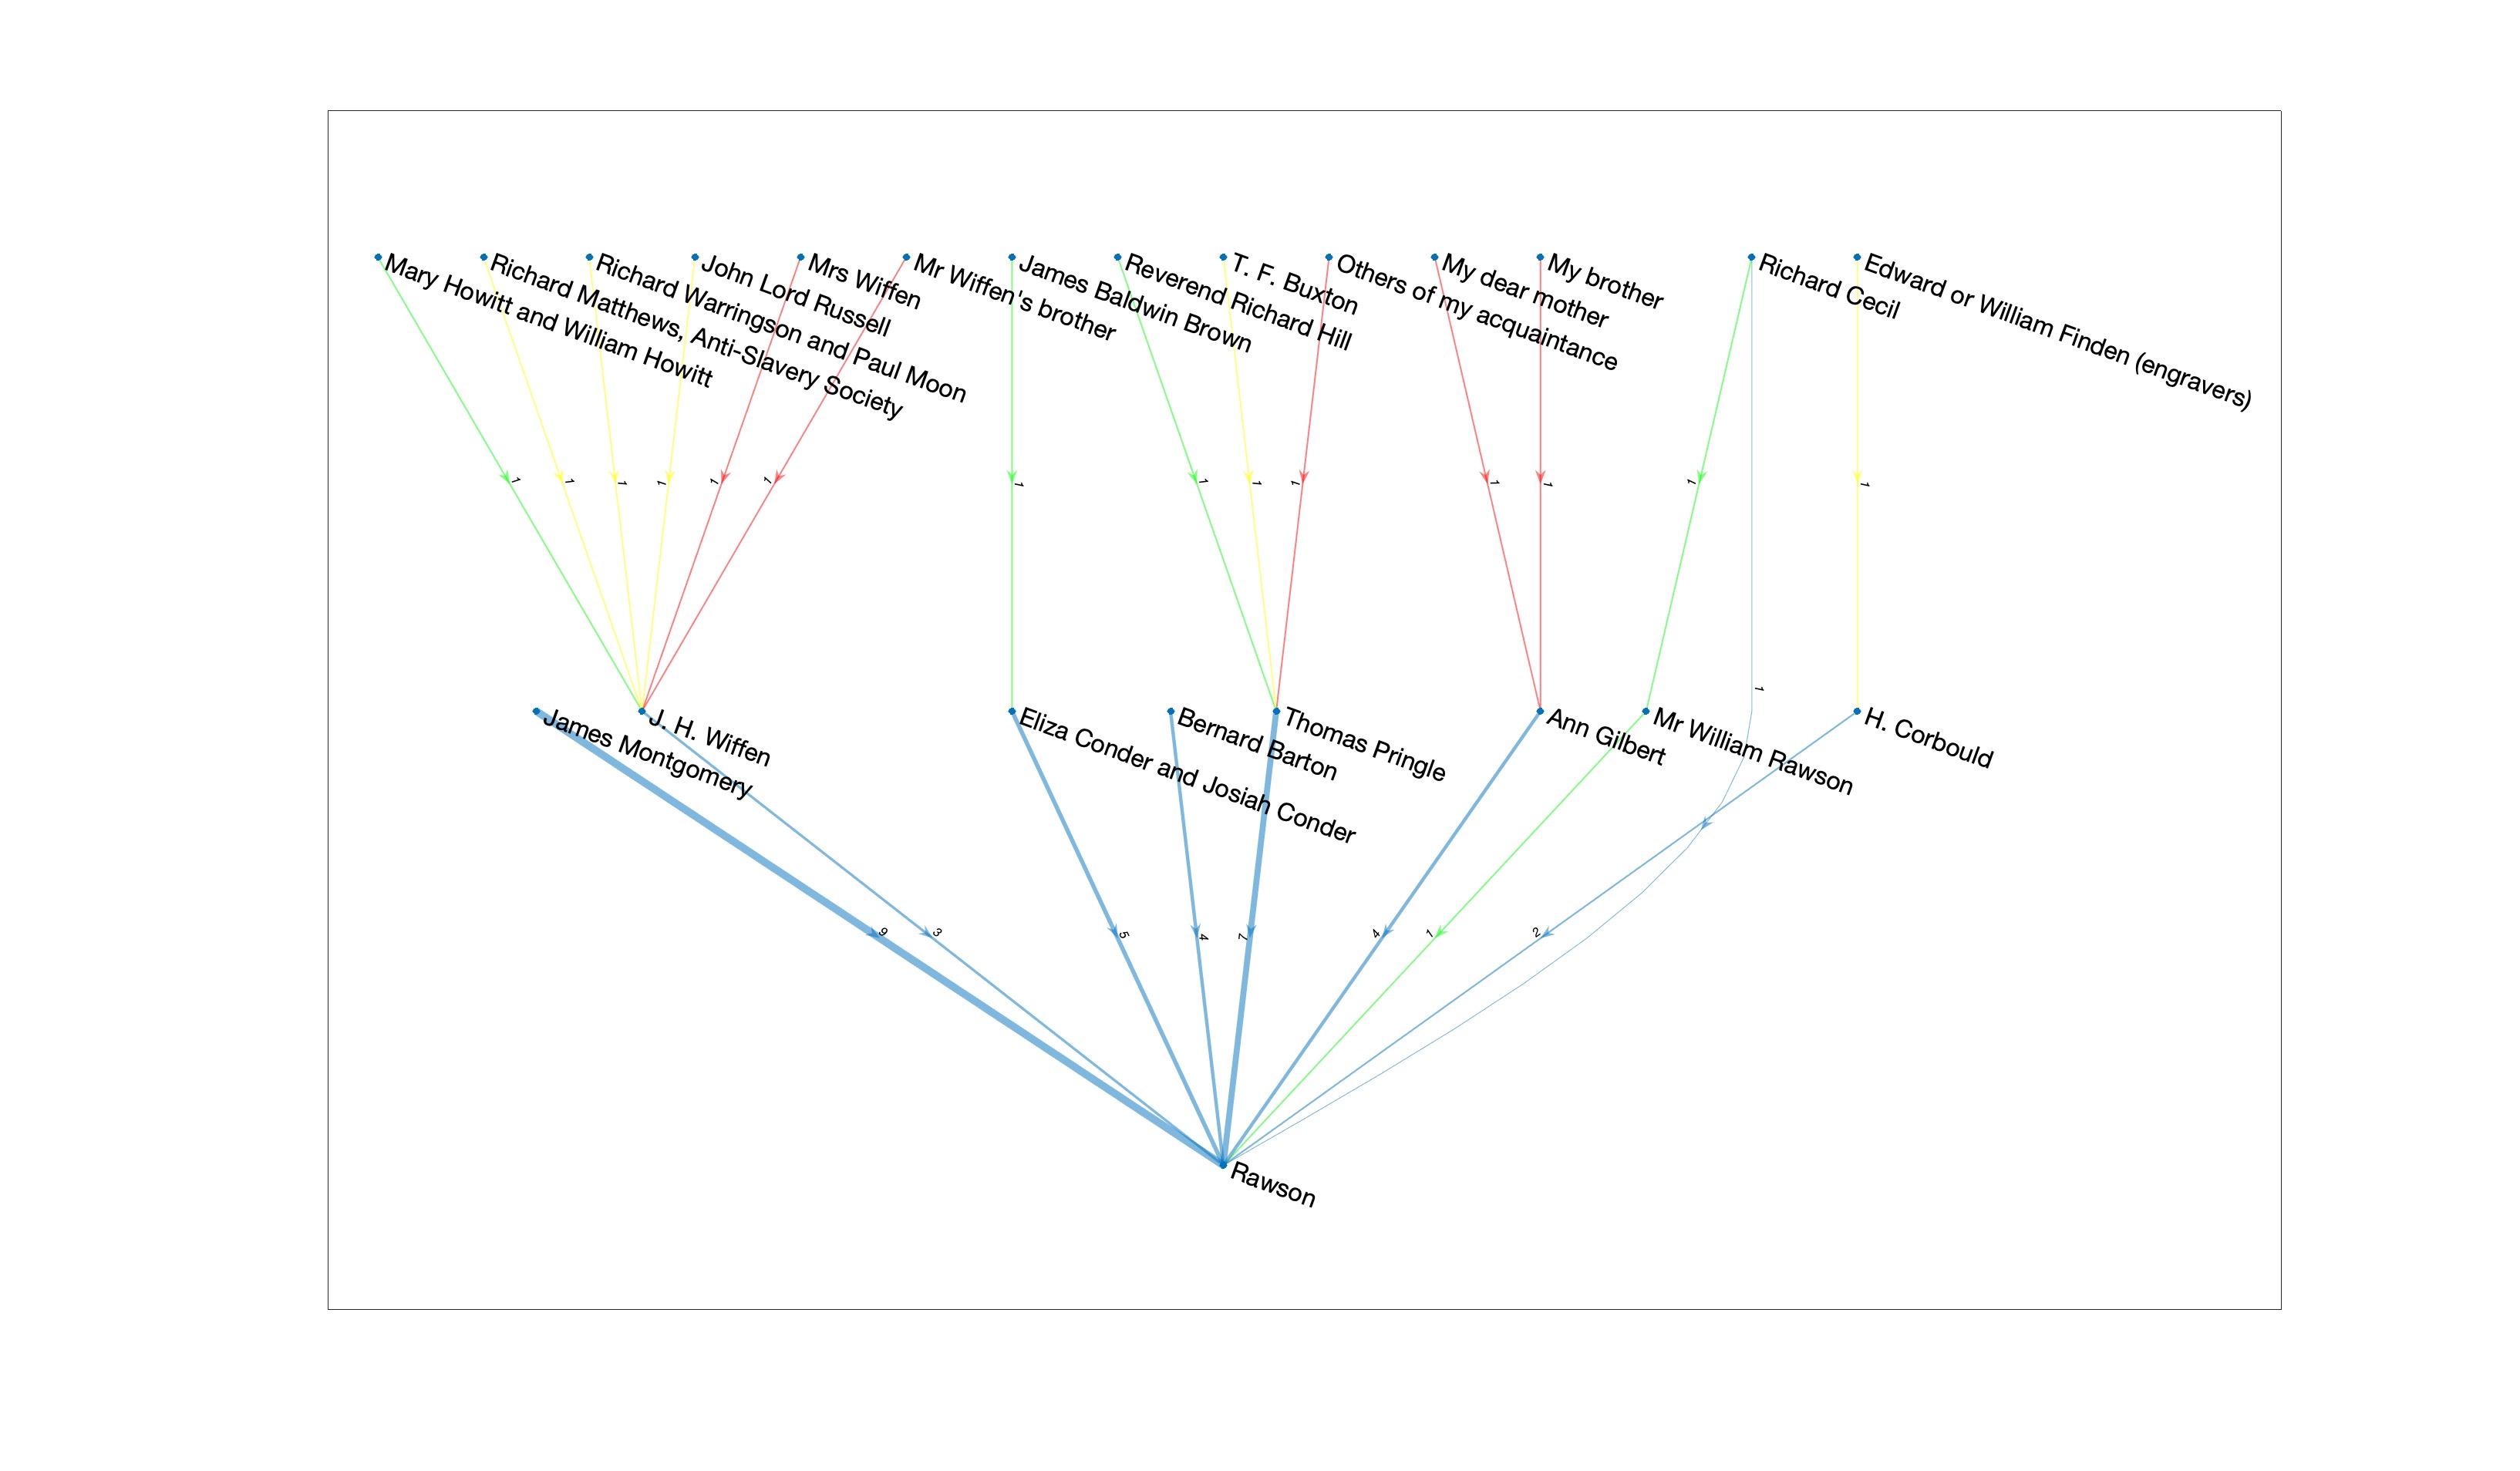 Network graph visualizing correspondents who gave editorial advice to Rawson